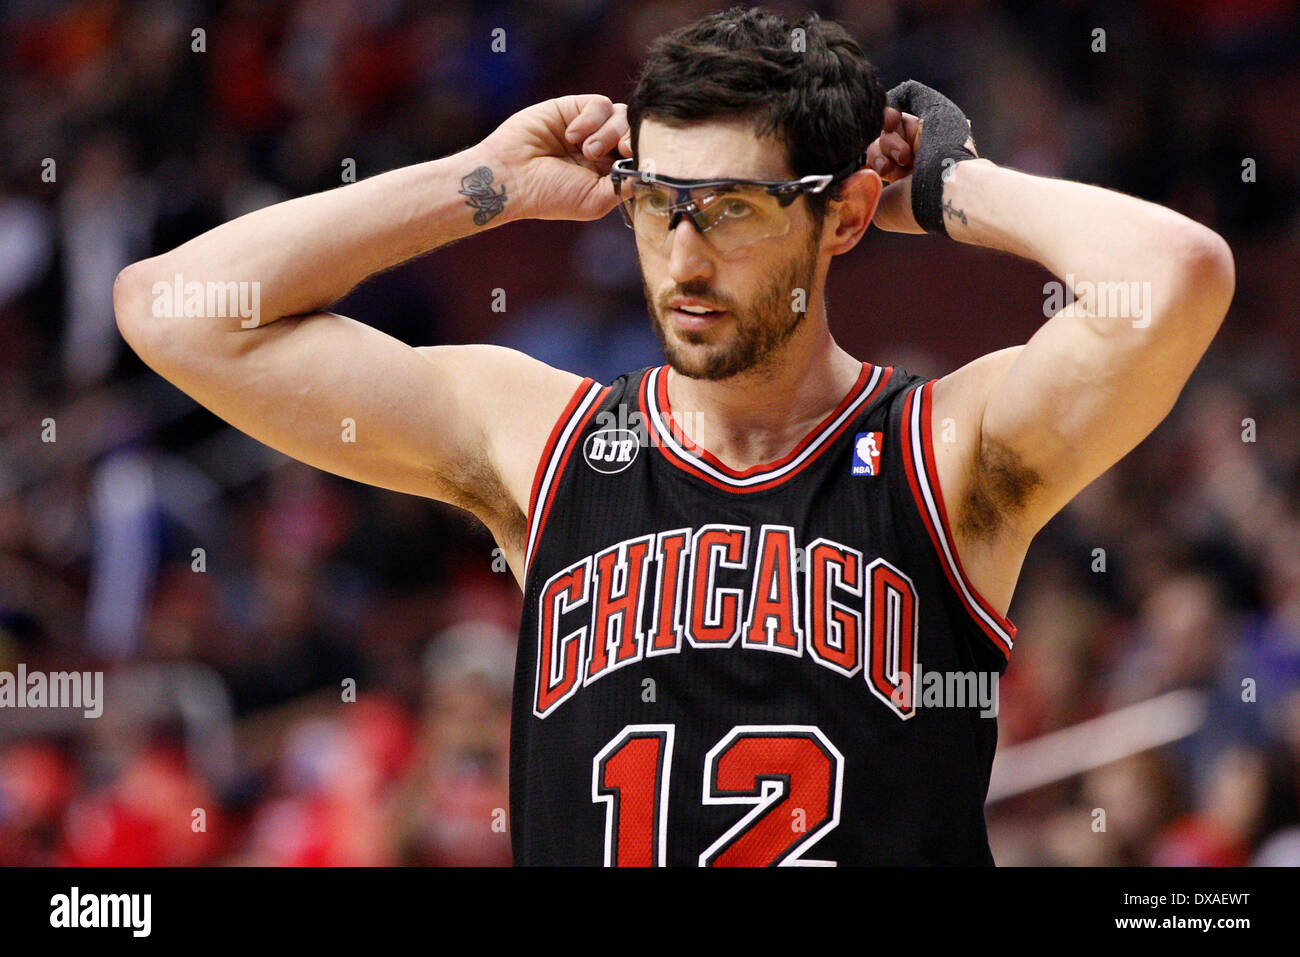 March 19, 2014: Chicago Bulls guard Kirk Hinrich (12) looks on as he fixes his glasses during the NBA game between the Chicago Bulls and the Philadelphia 76ers at the Wells Fargo Center in Philadelphia, Pennsylvania. The Bulls won 102-94. Christopher Szagola/Cal Sport Media Stock Photo